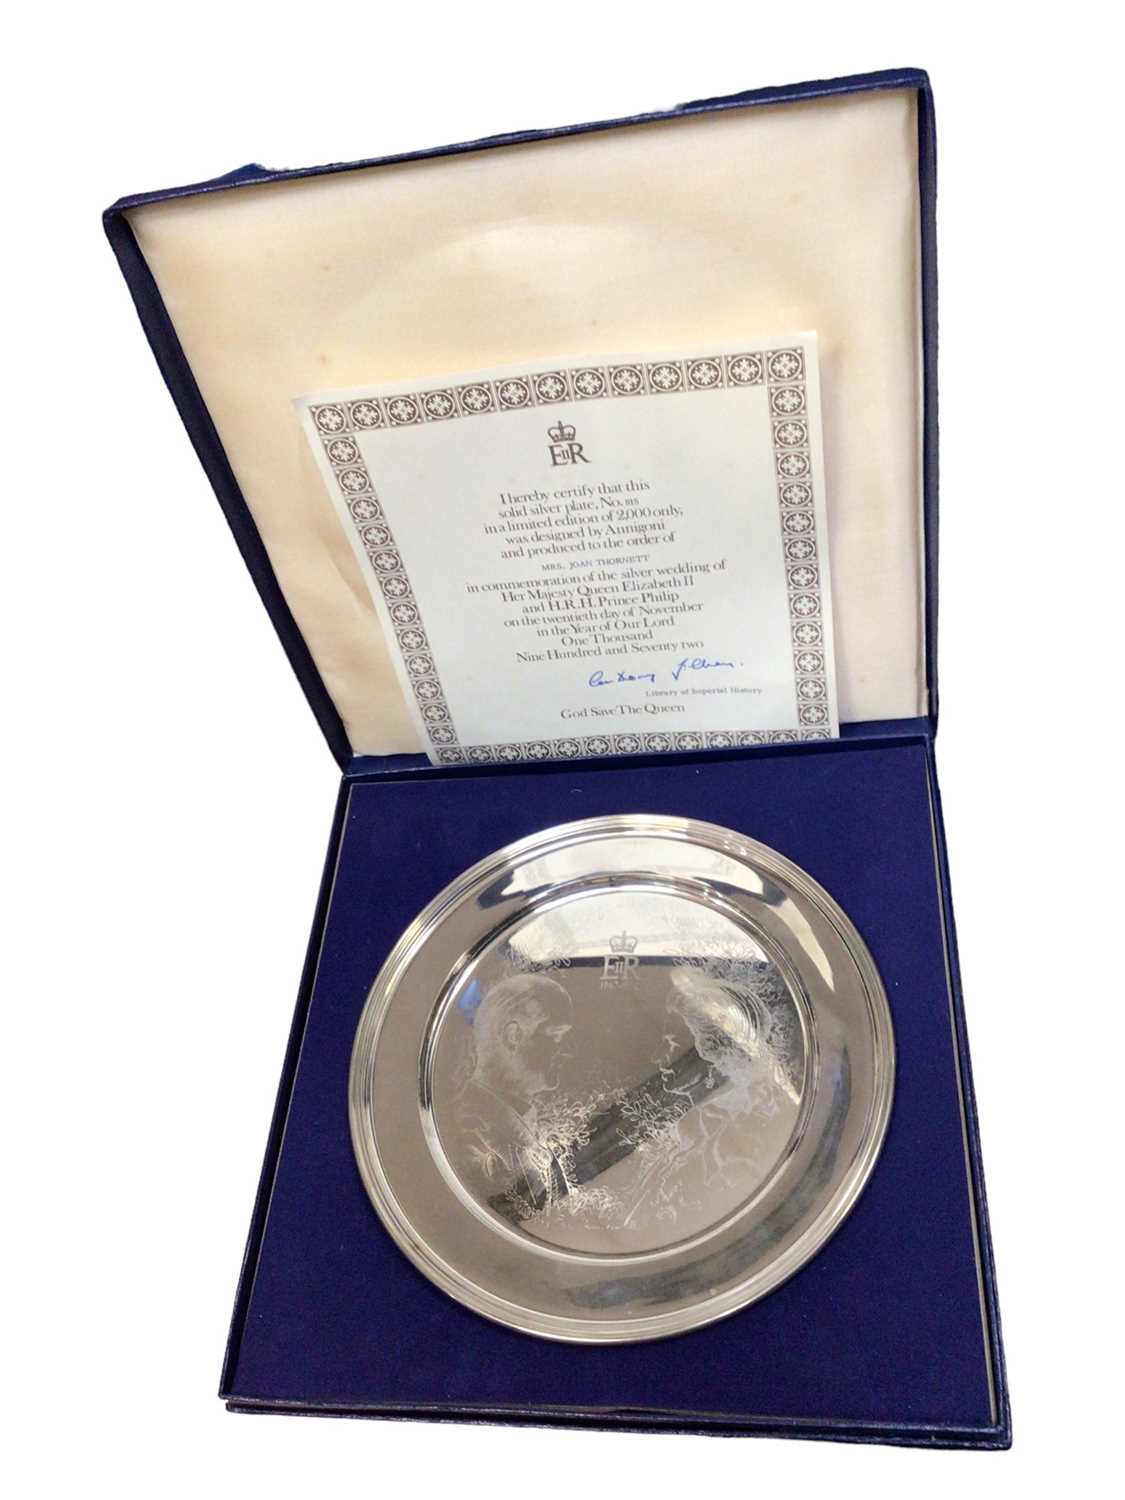 Lot 155 - Royal commemorative limited edition solid silver plate (London 1972) for the silver wedding of Her Majesty Queen Elizabeth II and H.R.H Prince Philip